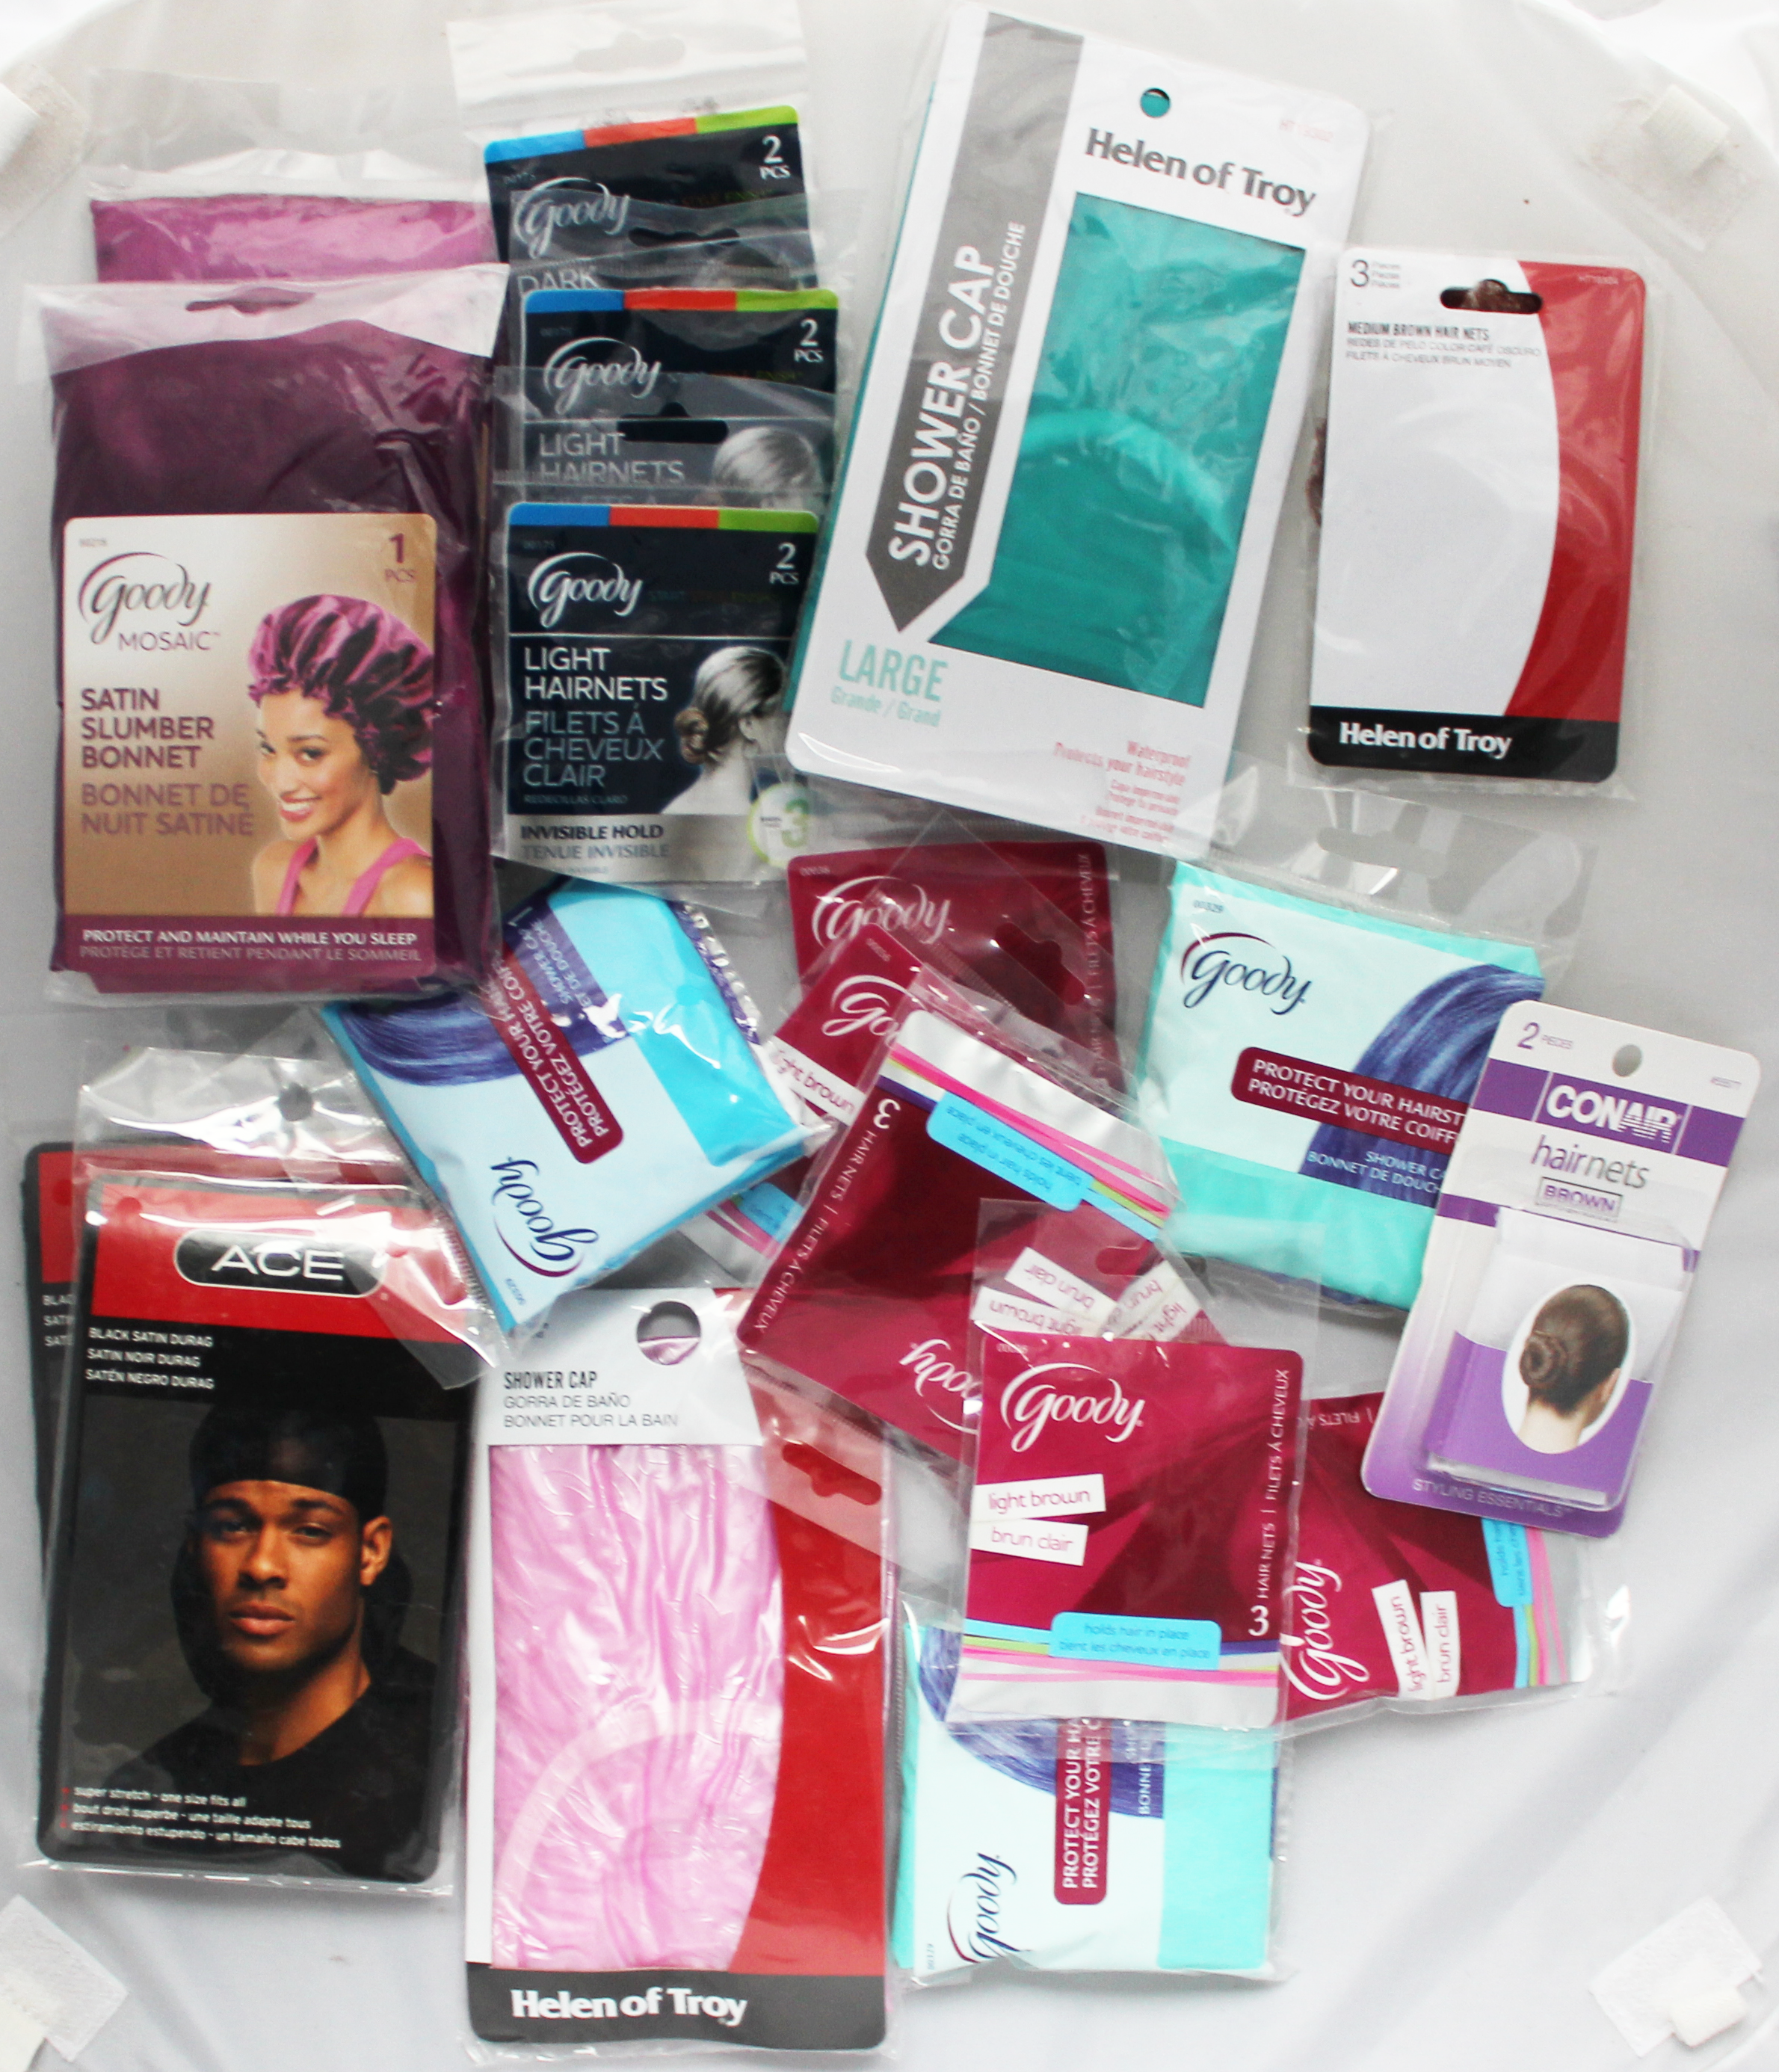 Goody, Ace, Helen Of Troy Shower Caps, Durags, Mesh HairNets 36-Pack Lot Mix - 1 Count